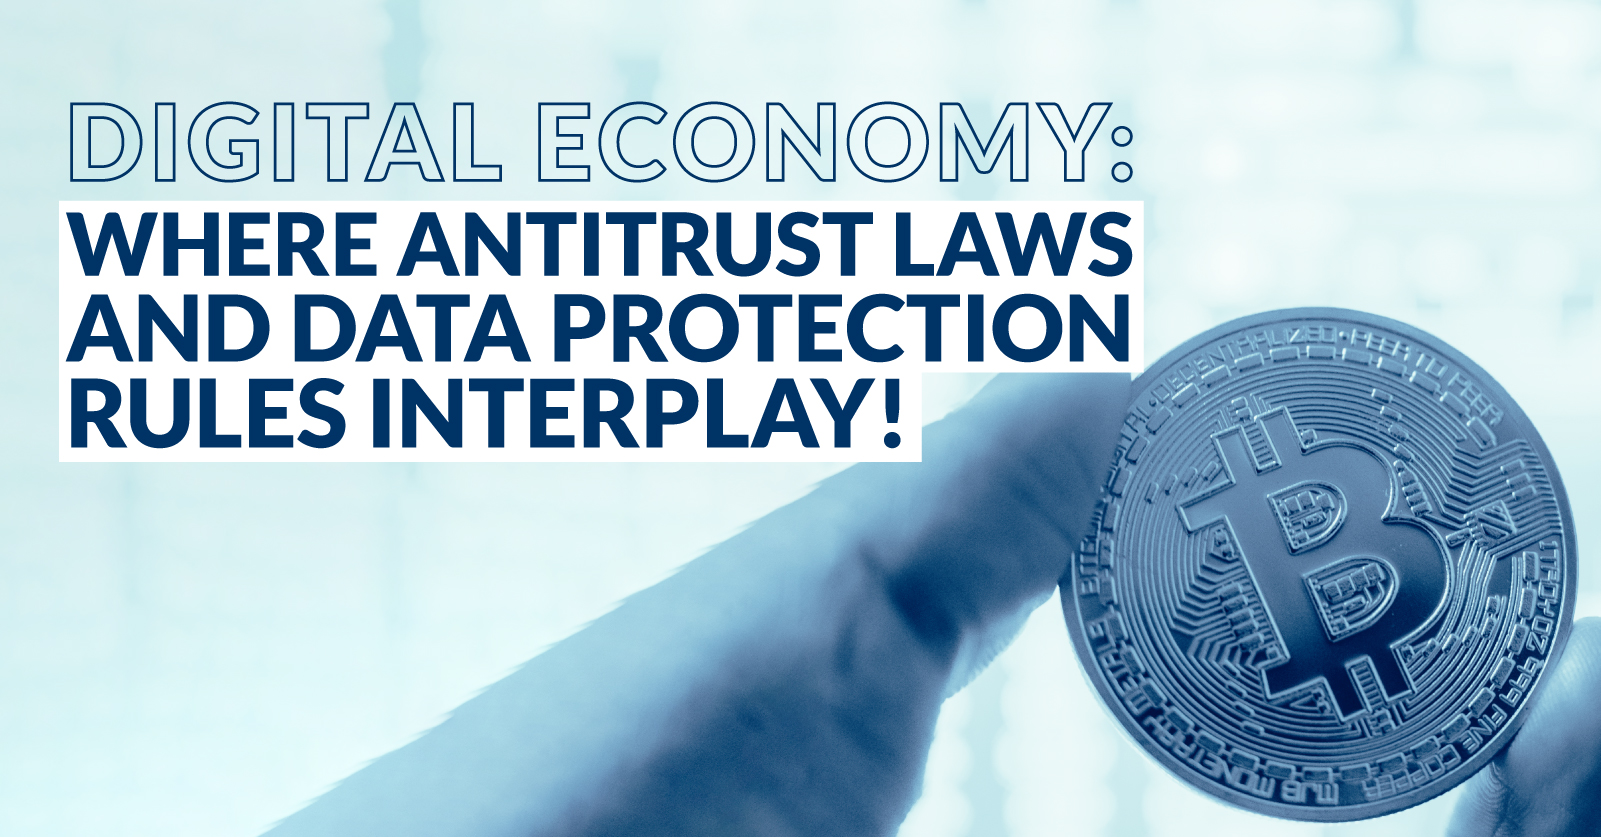 antitrust laws and data protection